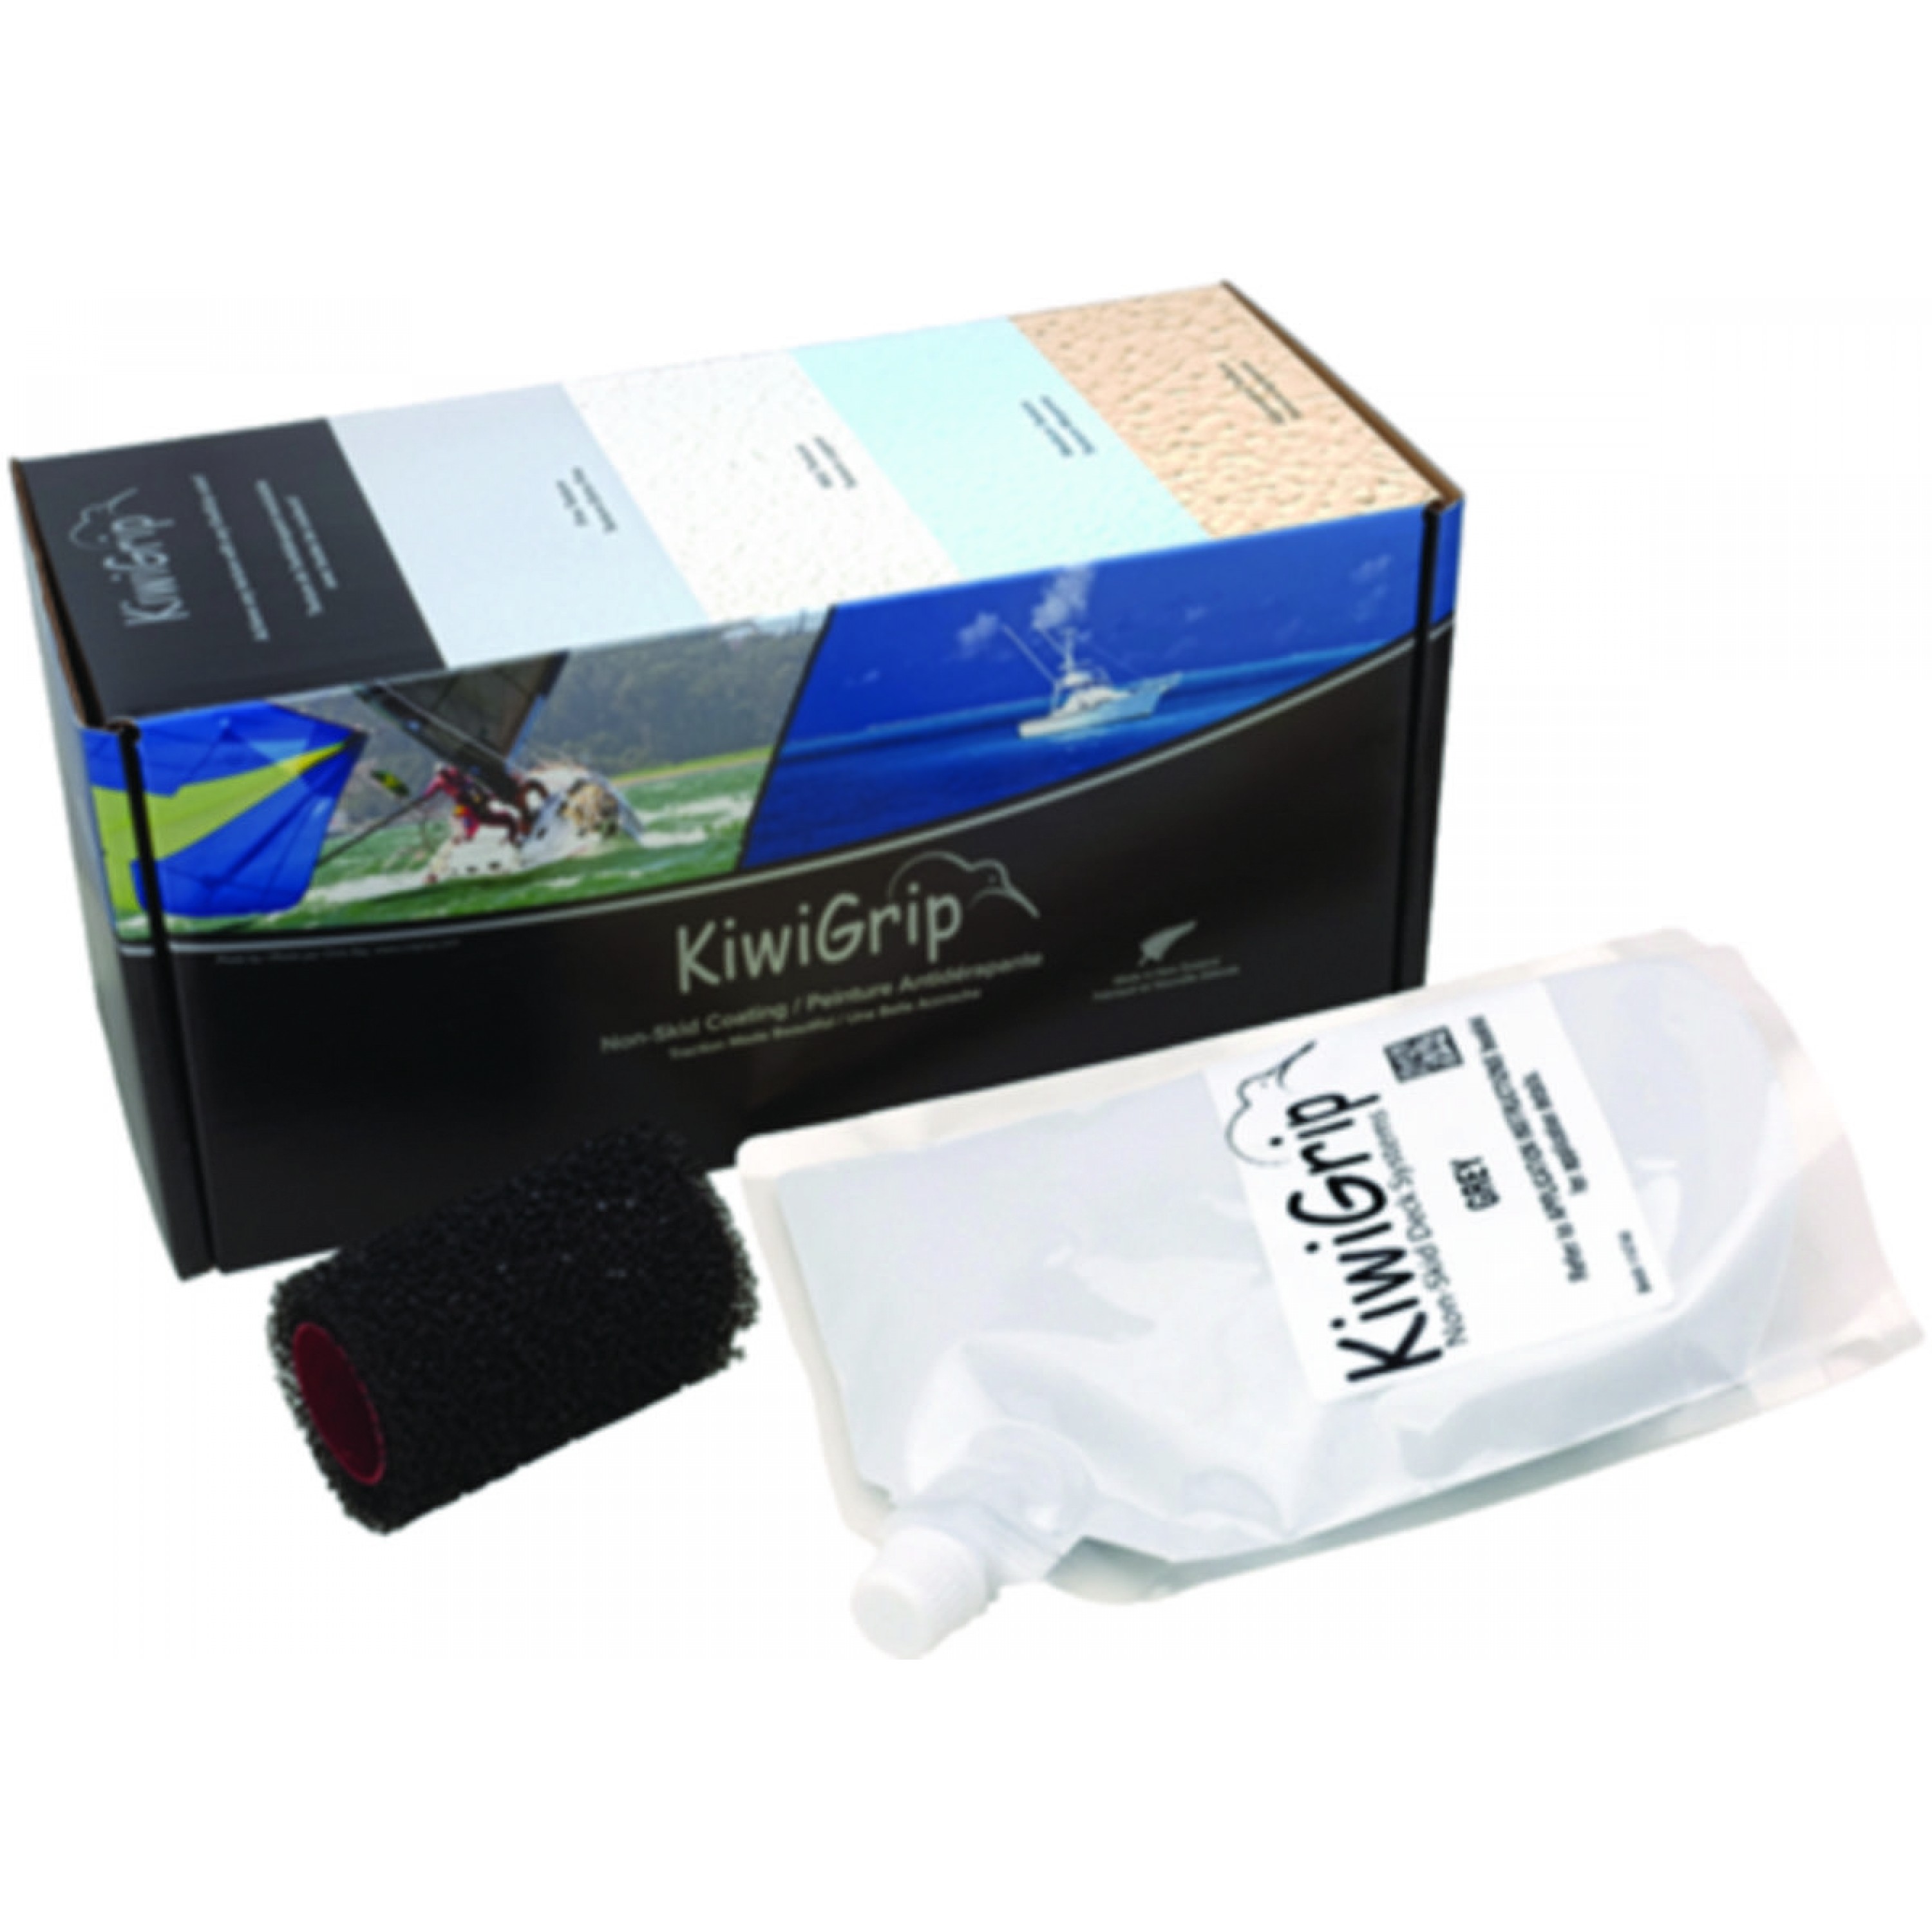 KIWIGRIP WHITE 1L POUCH WITH ROLLER NON-SKID COATING